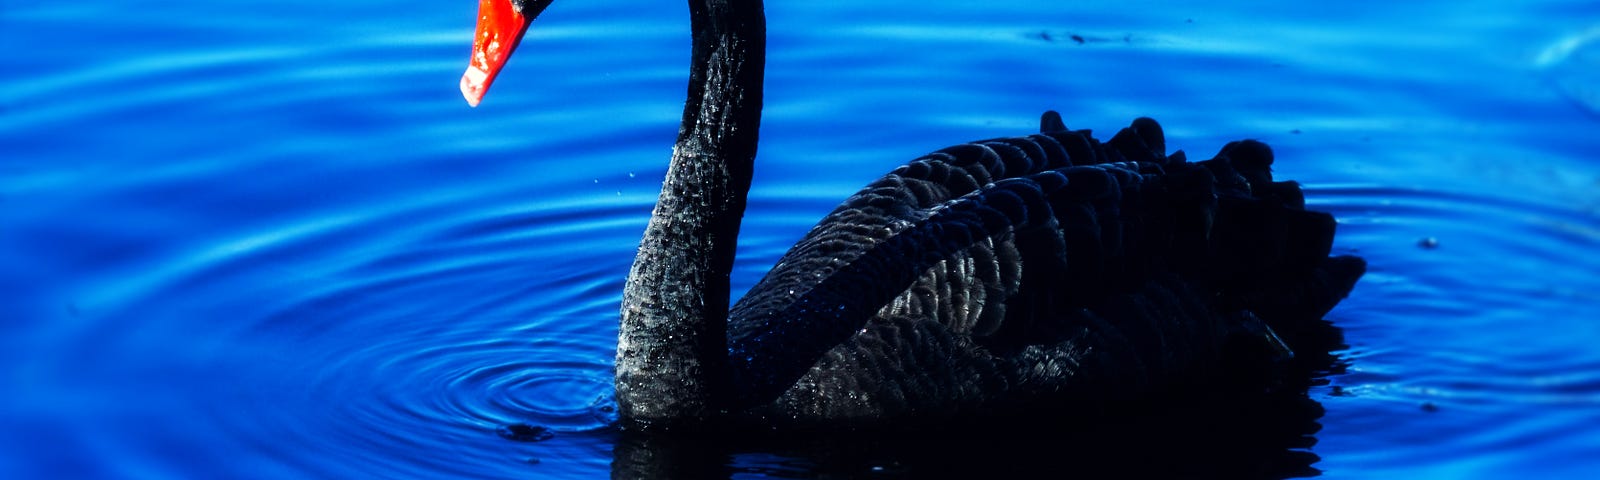 A black swan in a deep blue pool of water with ripples going outward